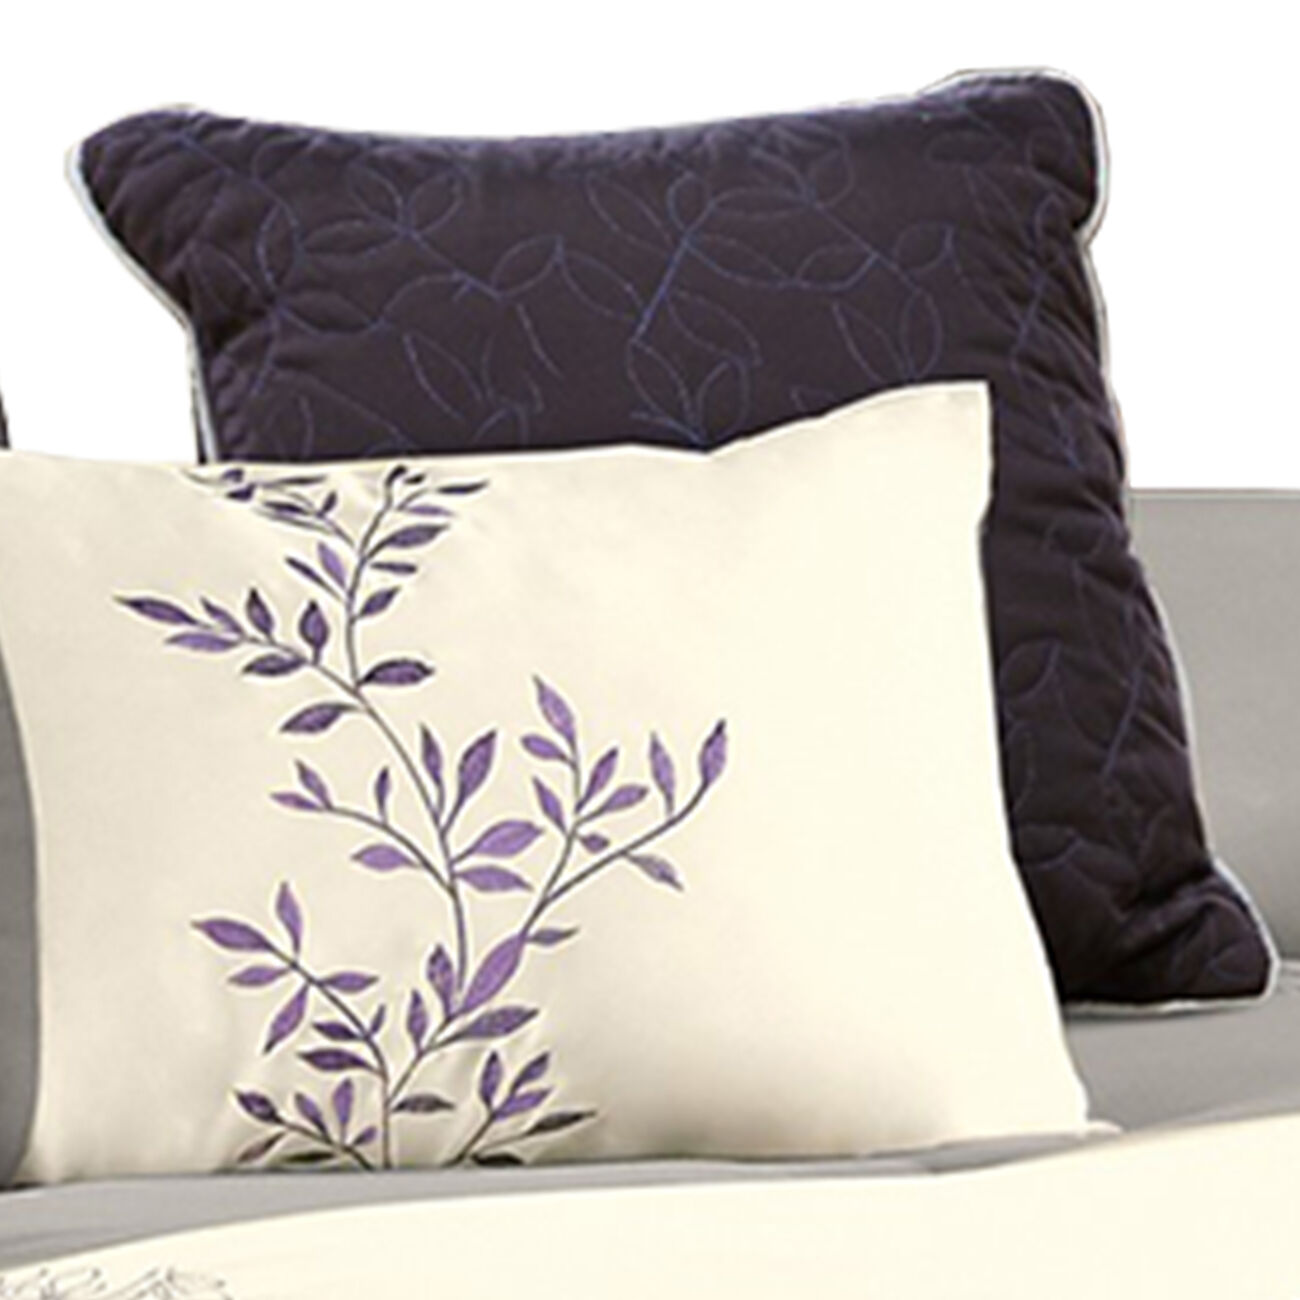 7 Piece Queen Polyester Comforter Set with Leaf Embroidery, Gray and Purple